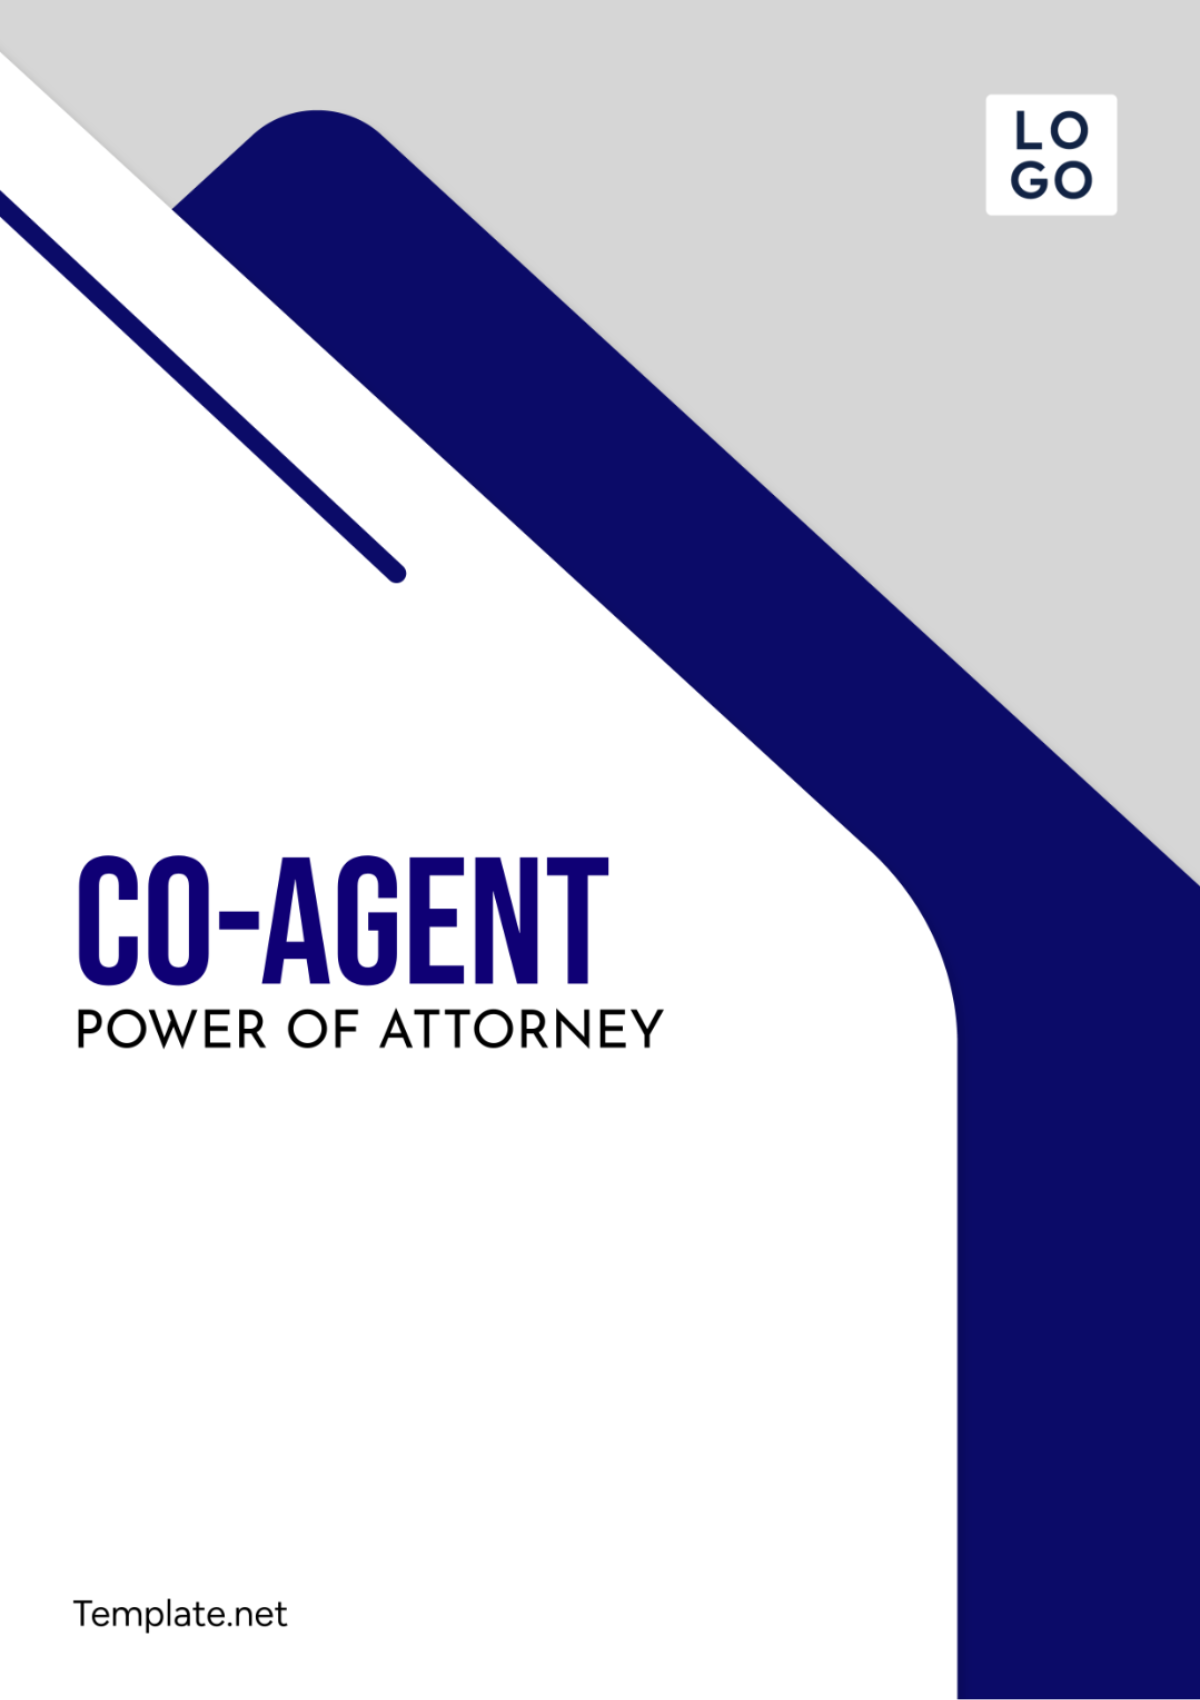 Co-Agent Power of Attorney Template